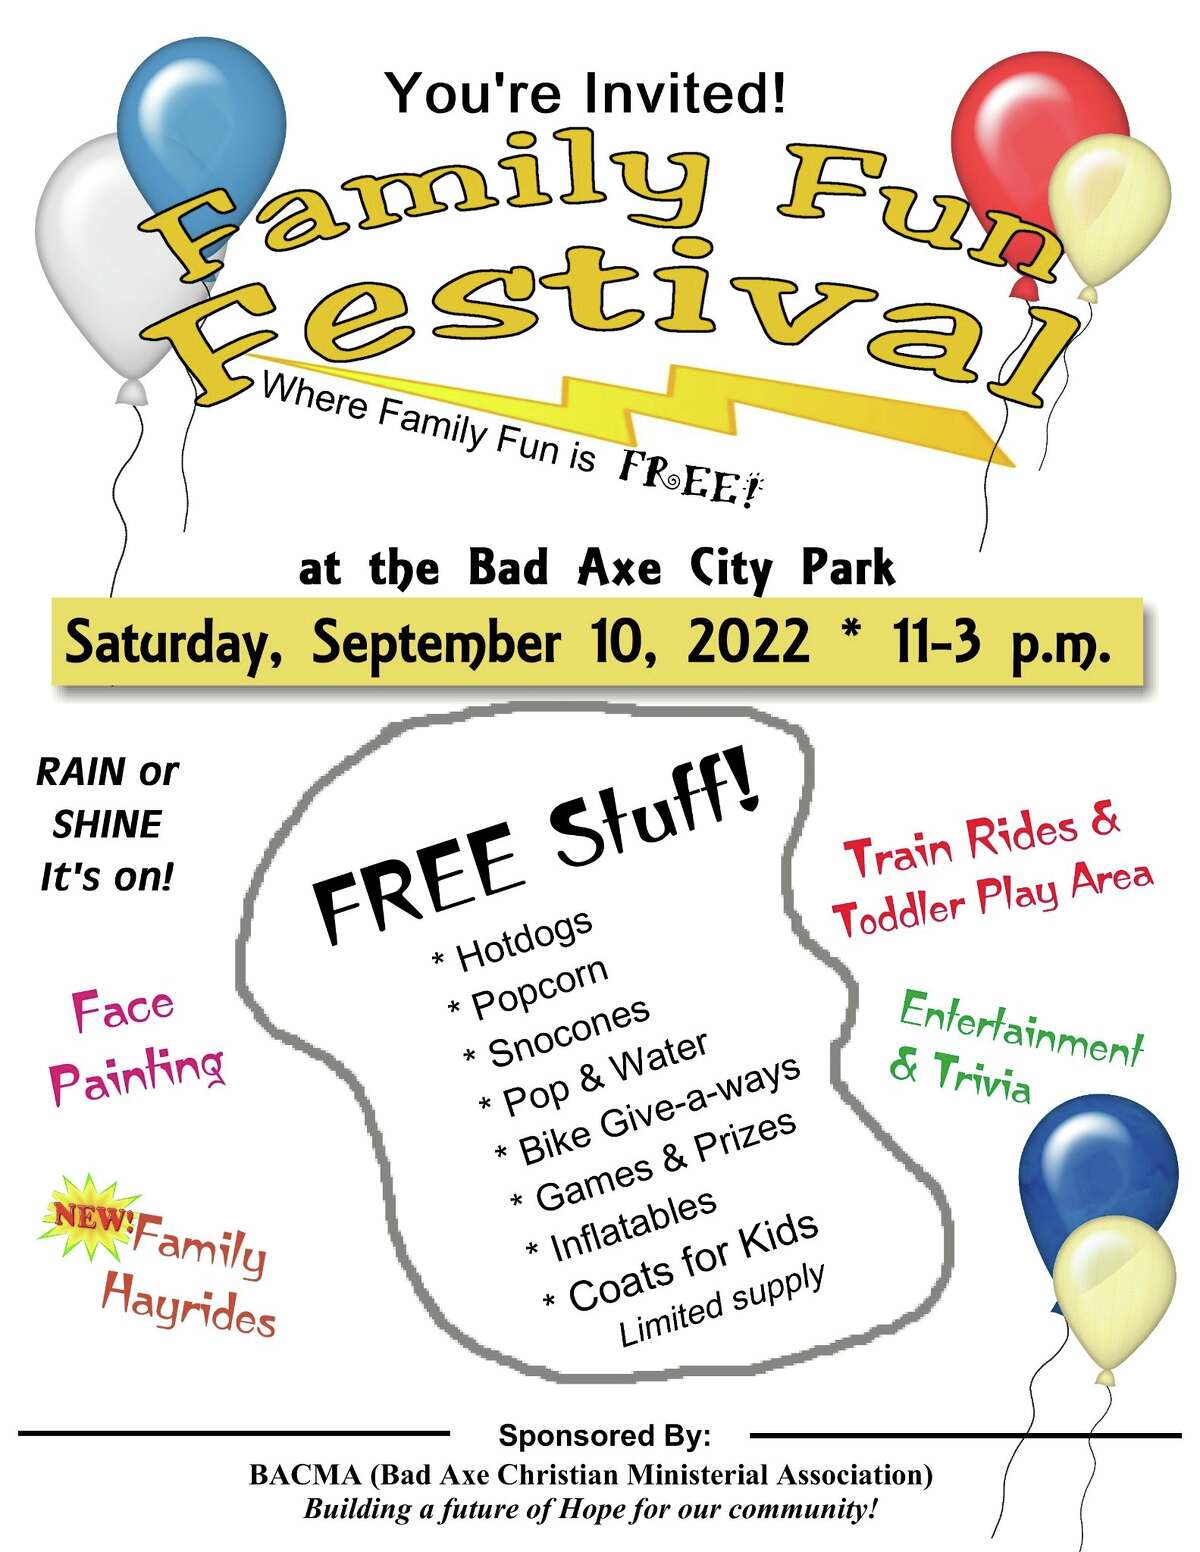 Bad Axe's Family Fun Festival is returning this Saturday, Sept. 10 from 11 a.m. to 3 p.m. at Bad Axe City Park. This year, the Bad Axe Christian Ministerial Association will sponsor the event cooperatively. The association, which consists of five different churches from the area, includes Faith Gospel Tabernacle, Evangel Life Assembly of God, Free Methodist Church, Bad Axe Church of the Nazarene and First United Methodist Church of Bad Axe.